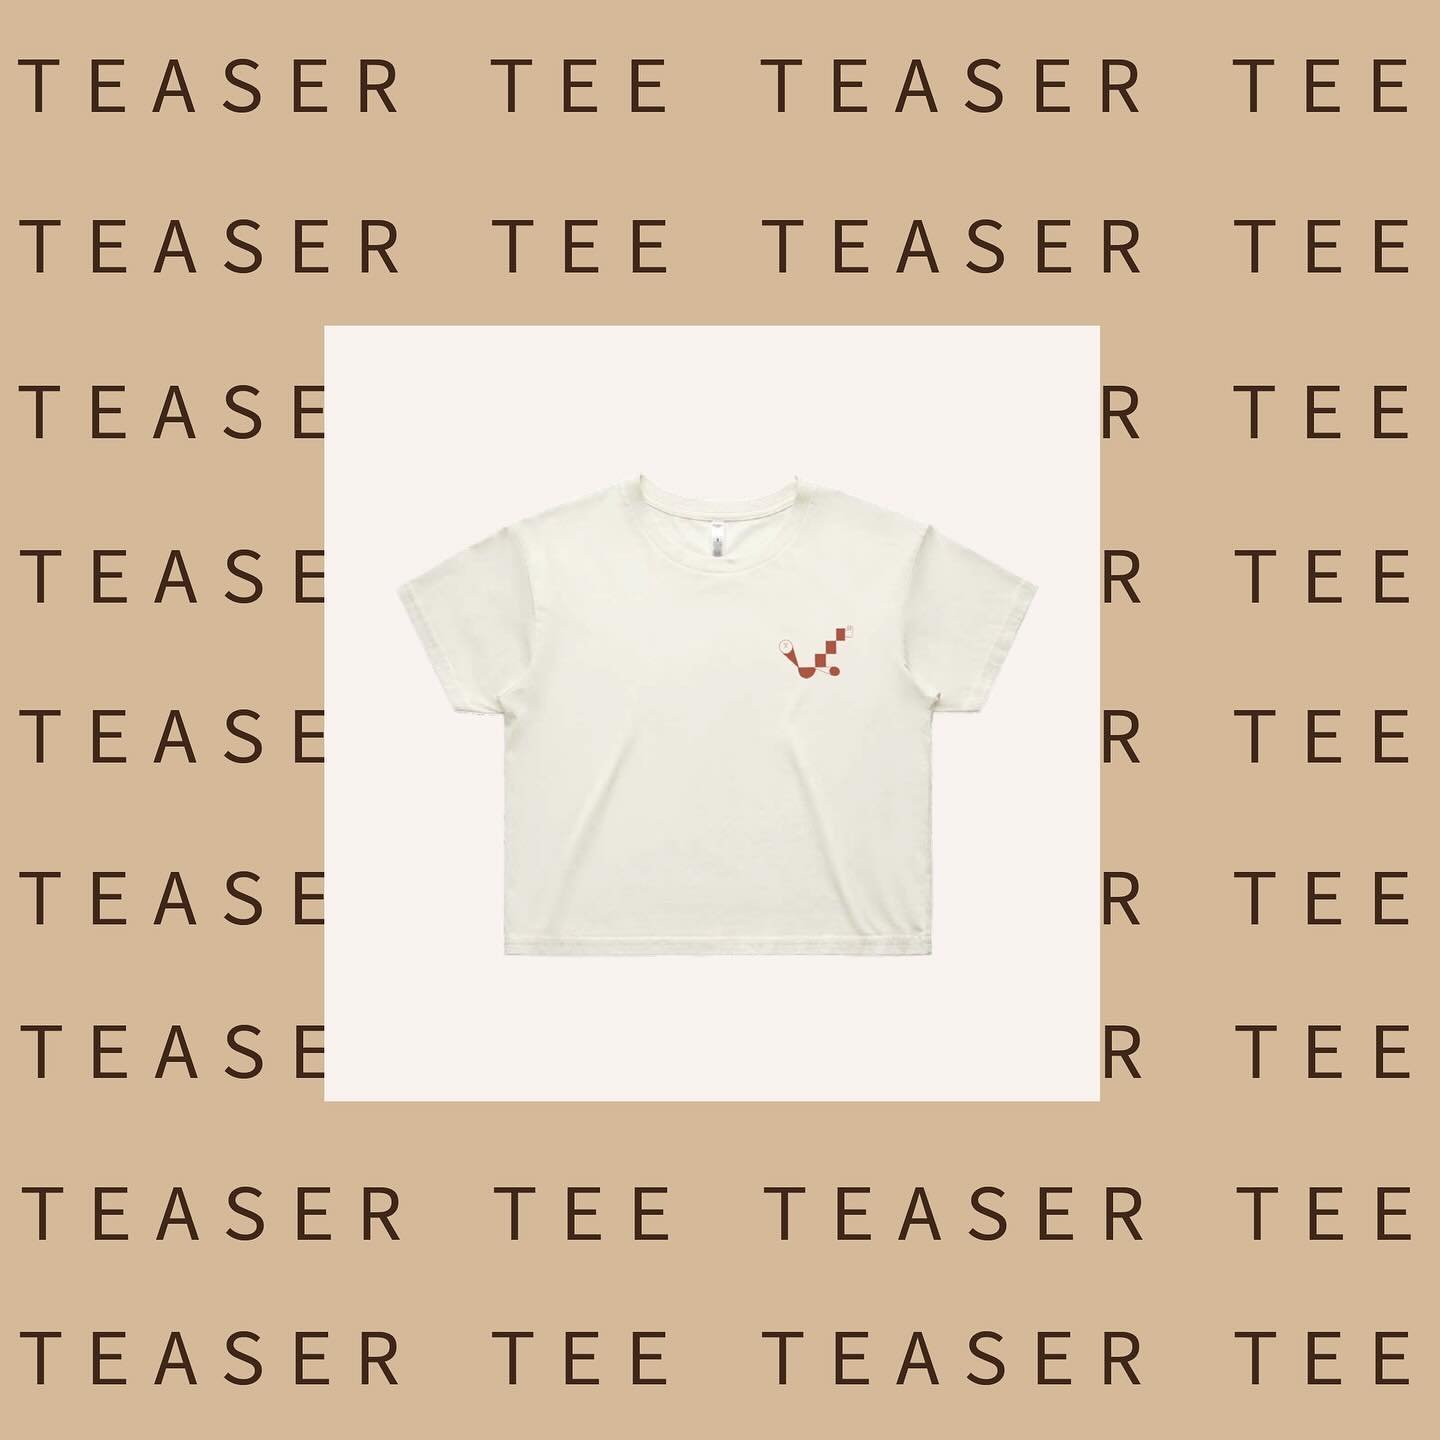 welcome the Teaser Tee! A sweet t-shirt for all genders in two styles:

The Crop - Relaxed (cropped) fit
The Staple - Regular fit &amp; length

Both styles:

- Mid weight, 5.3 oz, 28-singles
- 100% combed cotton
- Preshrunk

Pre-order now! Arriving i